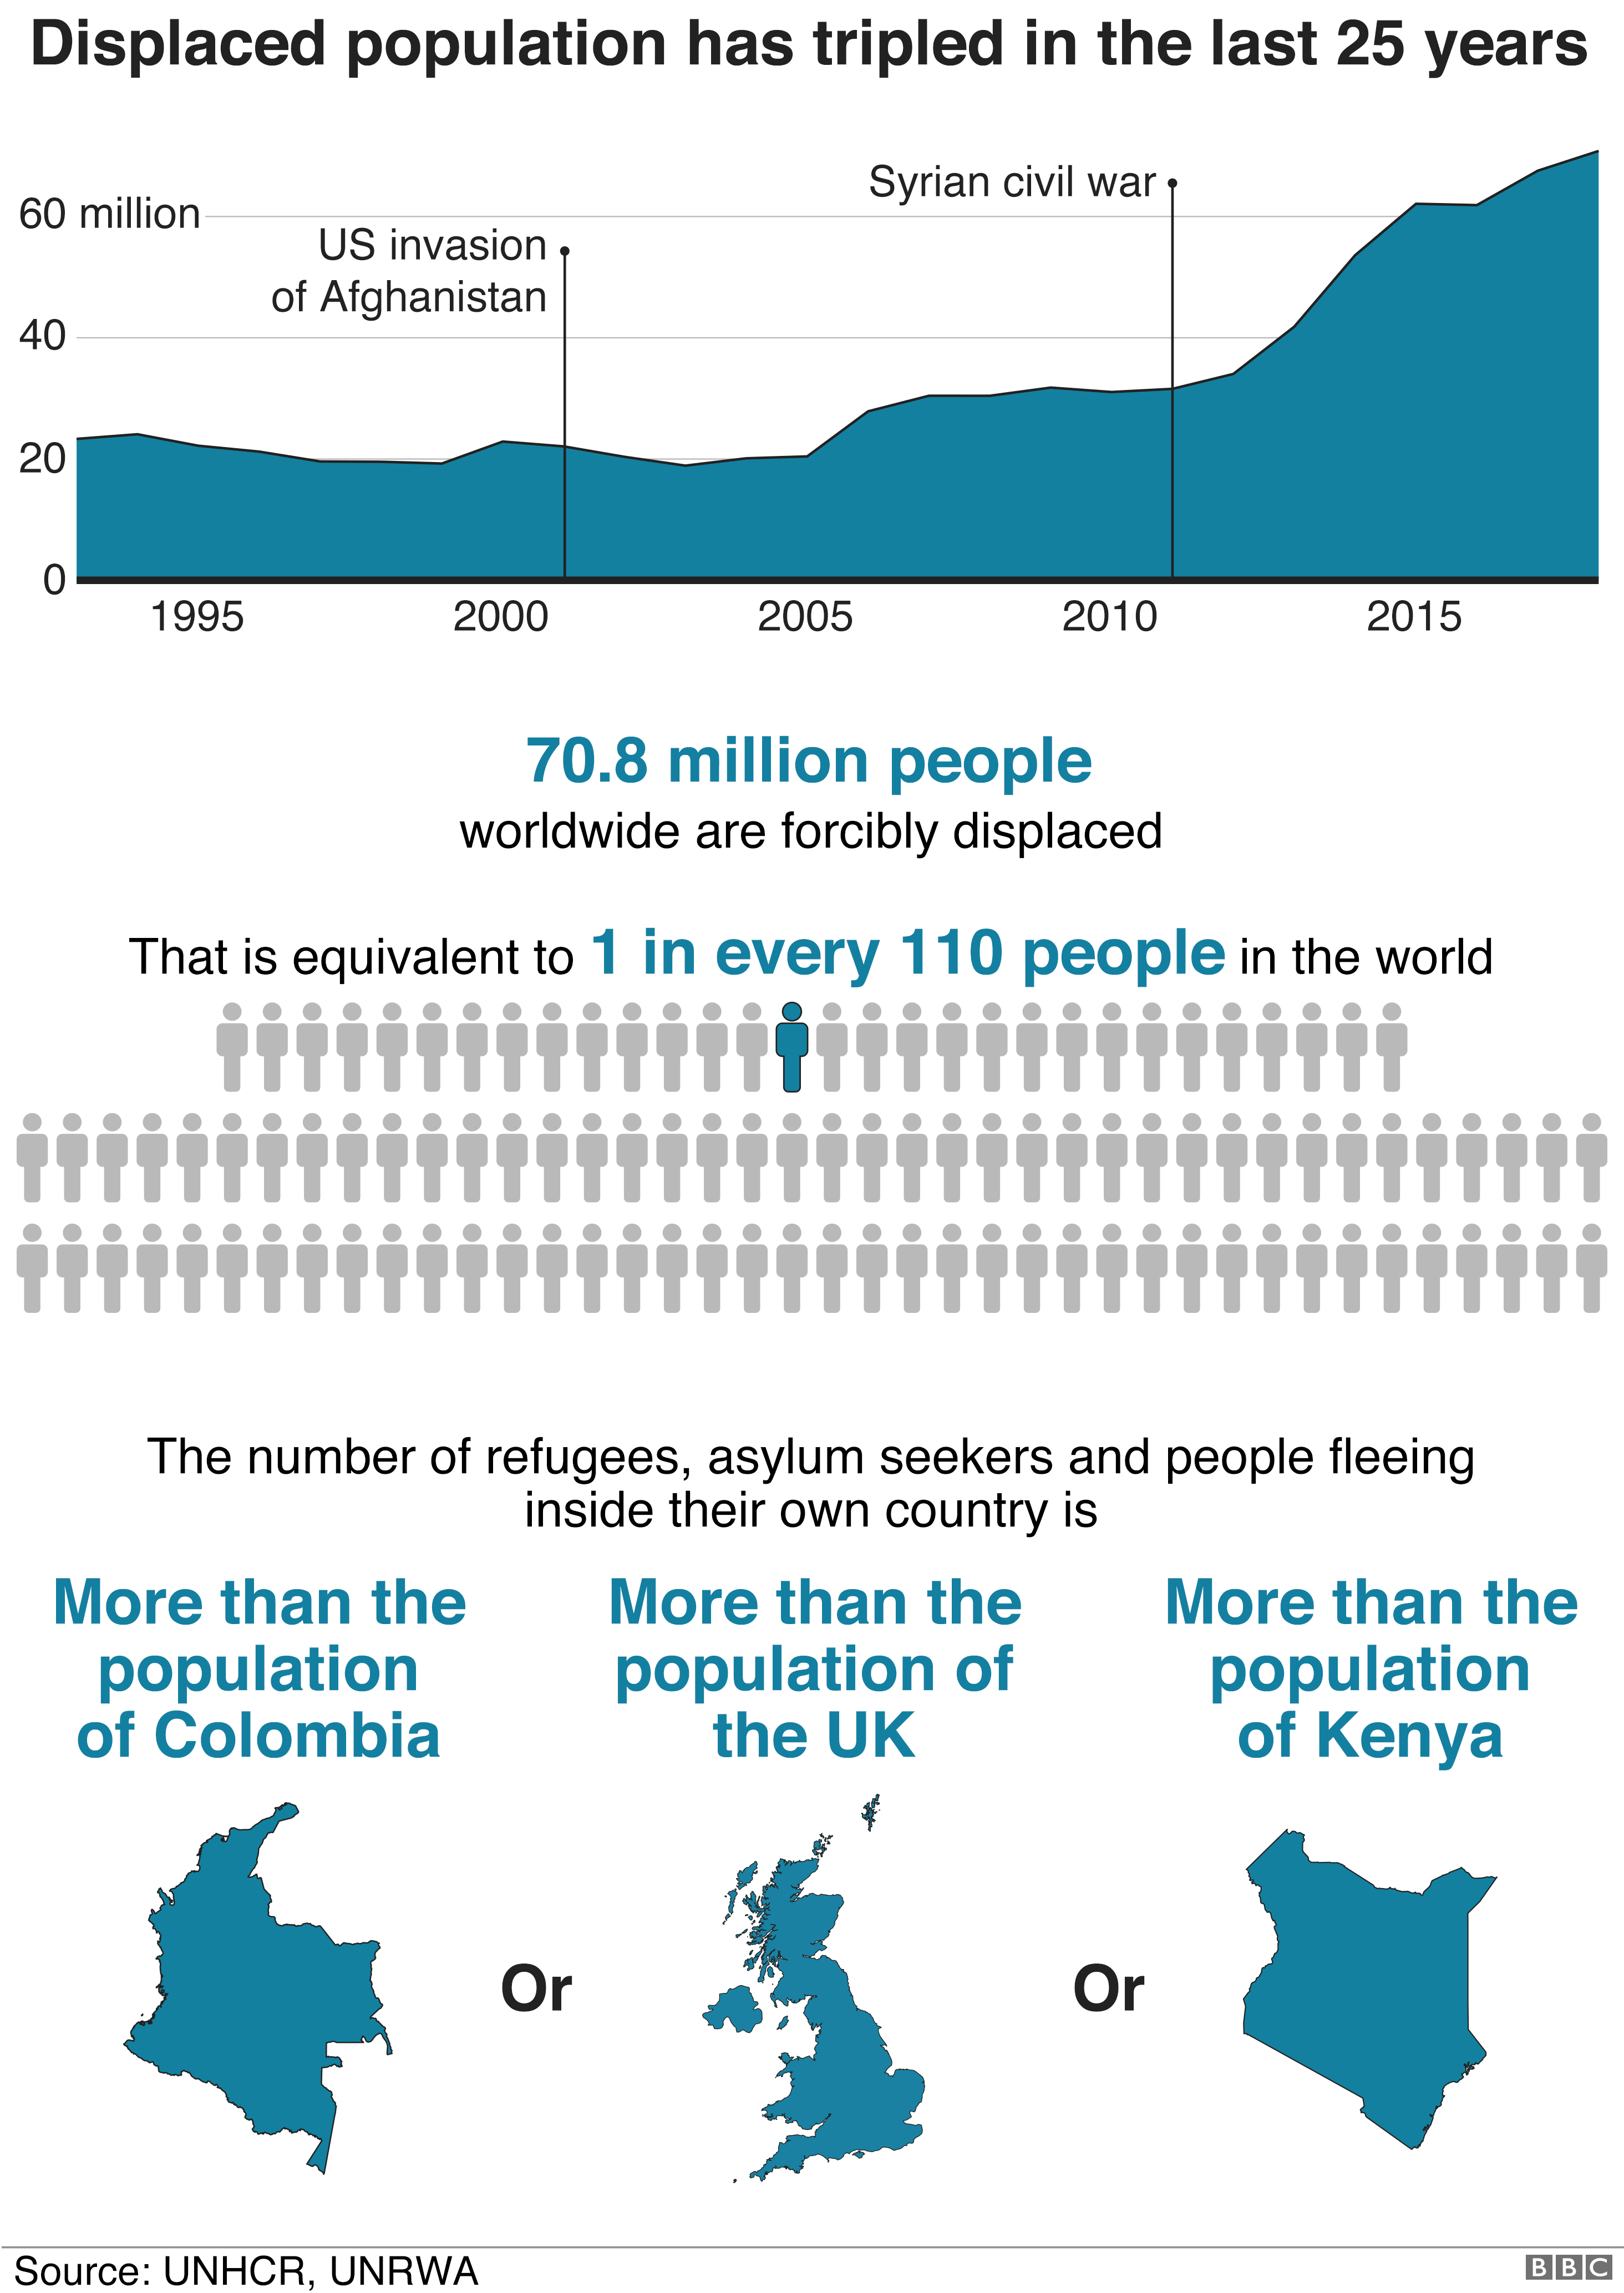 Graphic showing how the number of displaced people globally has tripled in the last 25 years